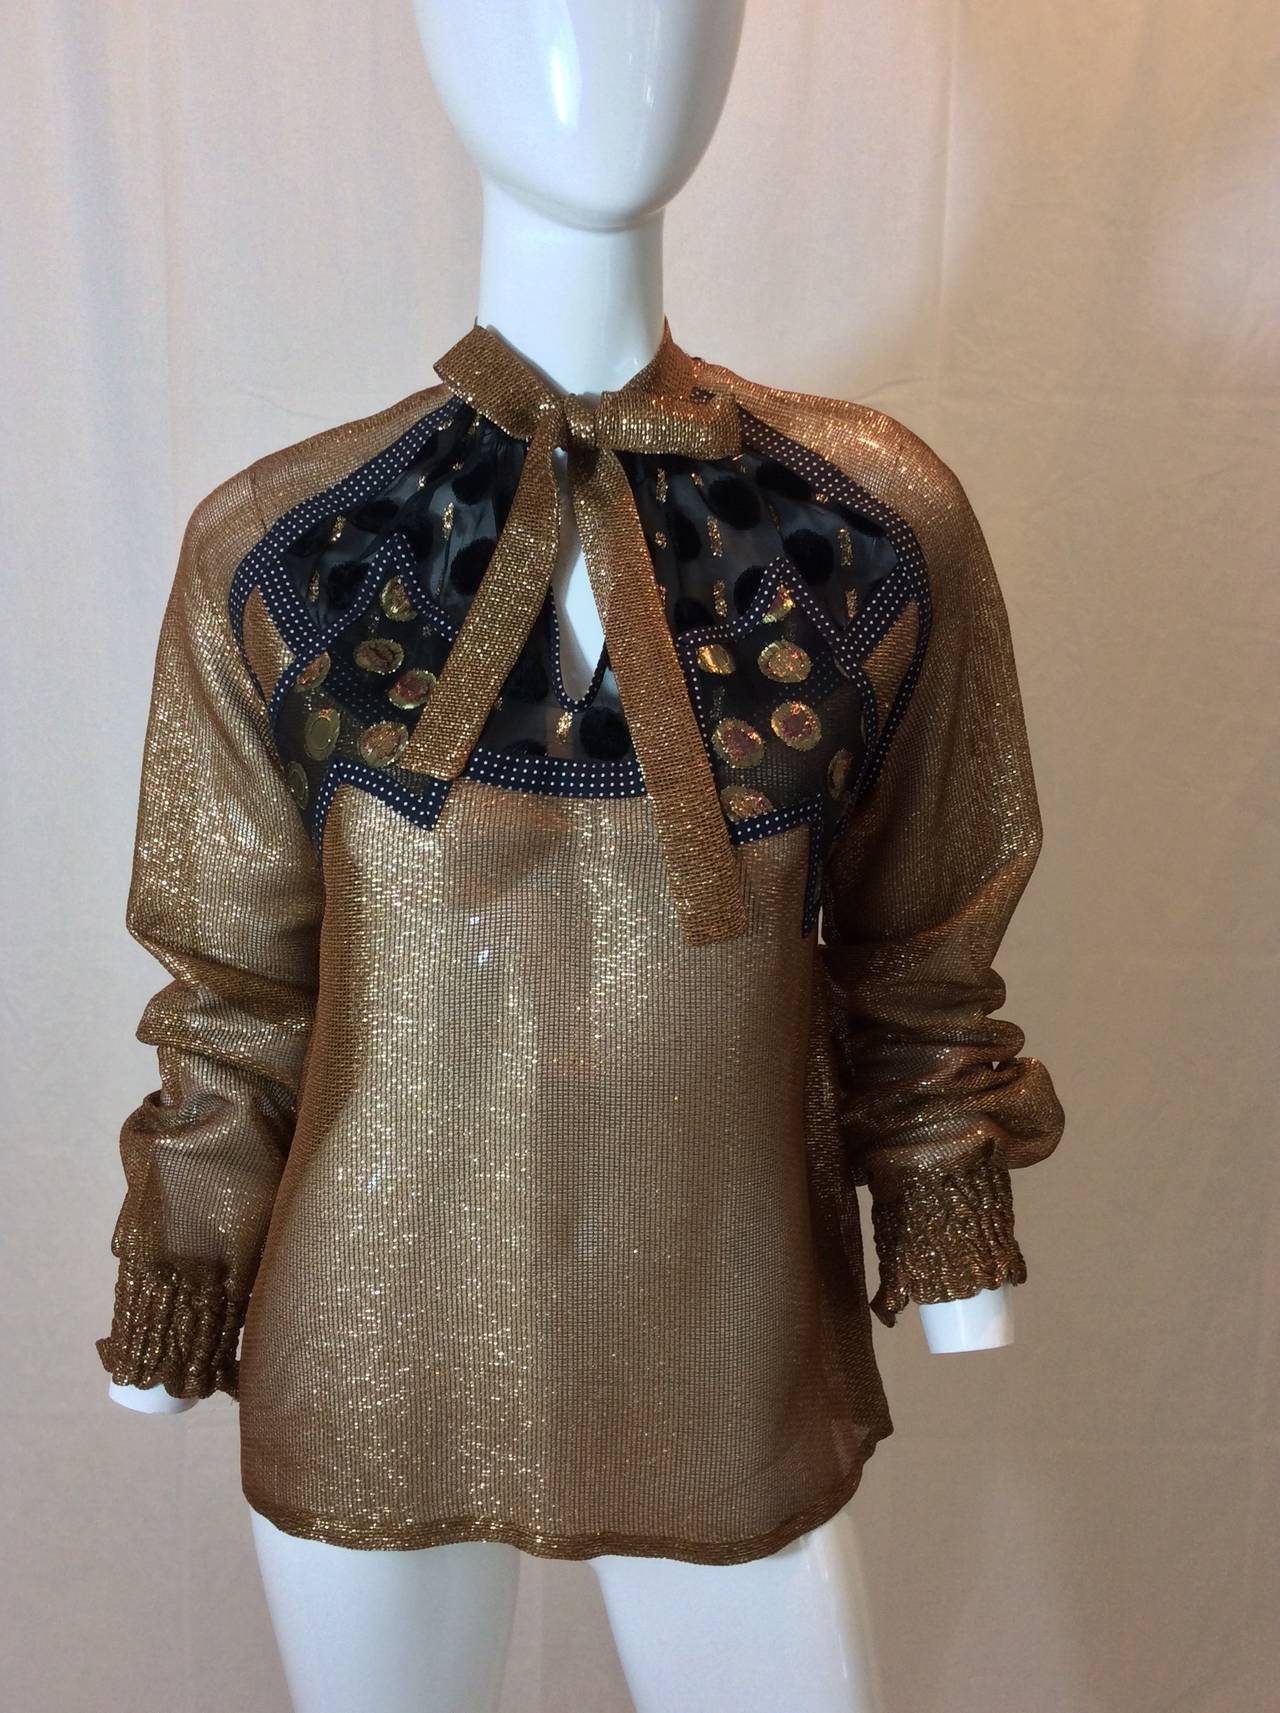 This gorgeous metallic gold and bronze blouse slips over the head with a key hole opening in the front. The fabric content  is unknown and soft to the touch. A black and white polka dot fabric runs along  the raglan sleeve seams and down the sides